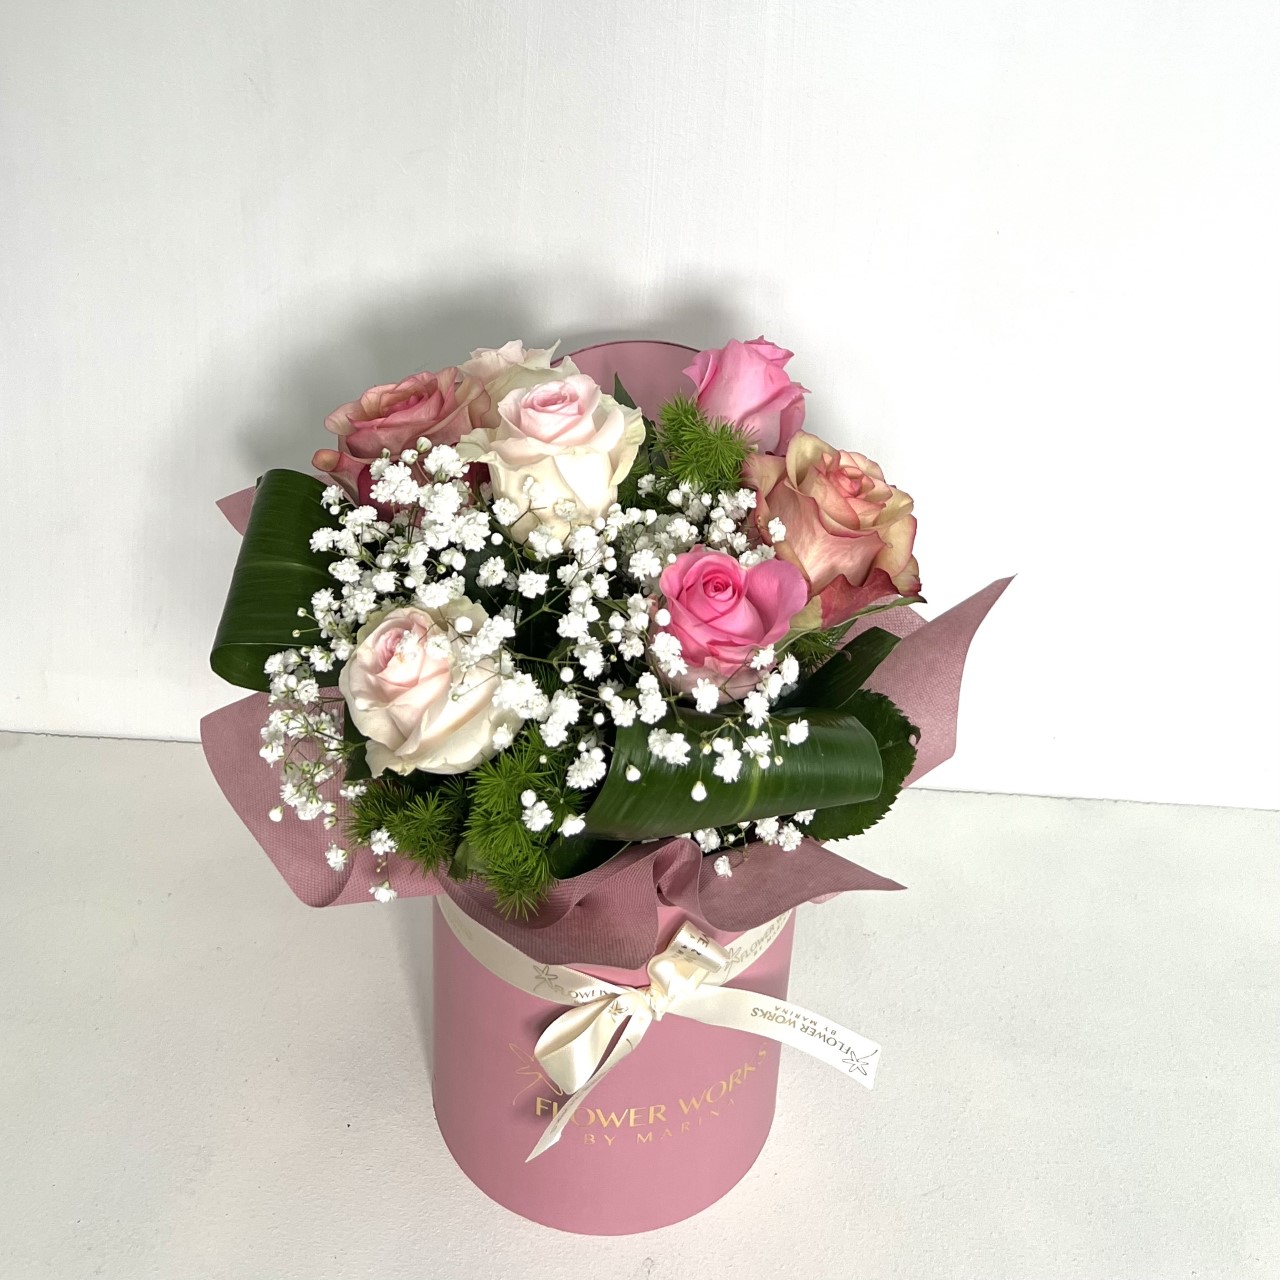 PINK COMPINATION OF ROSES AND GYPSOPHILA IN A BOX